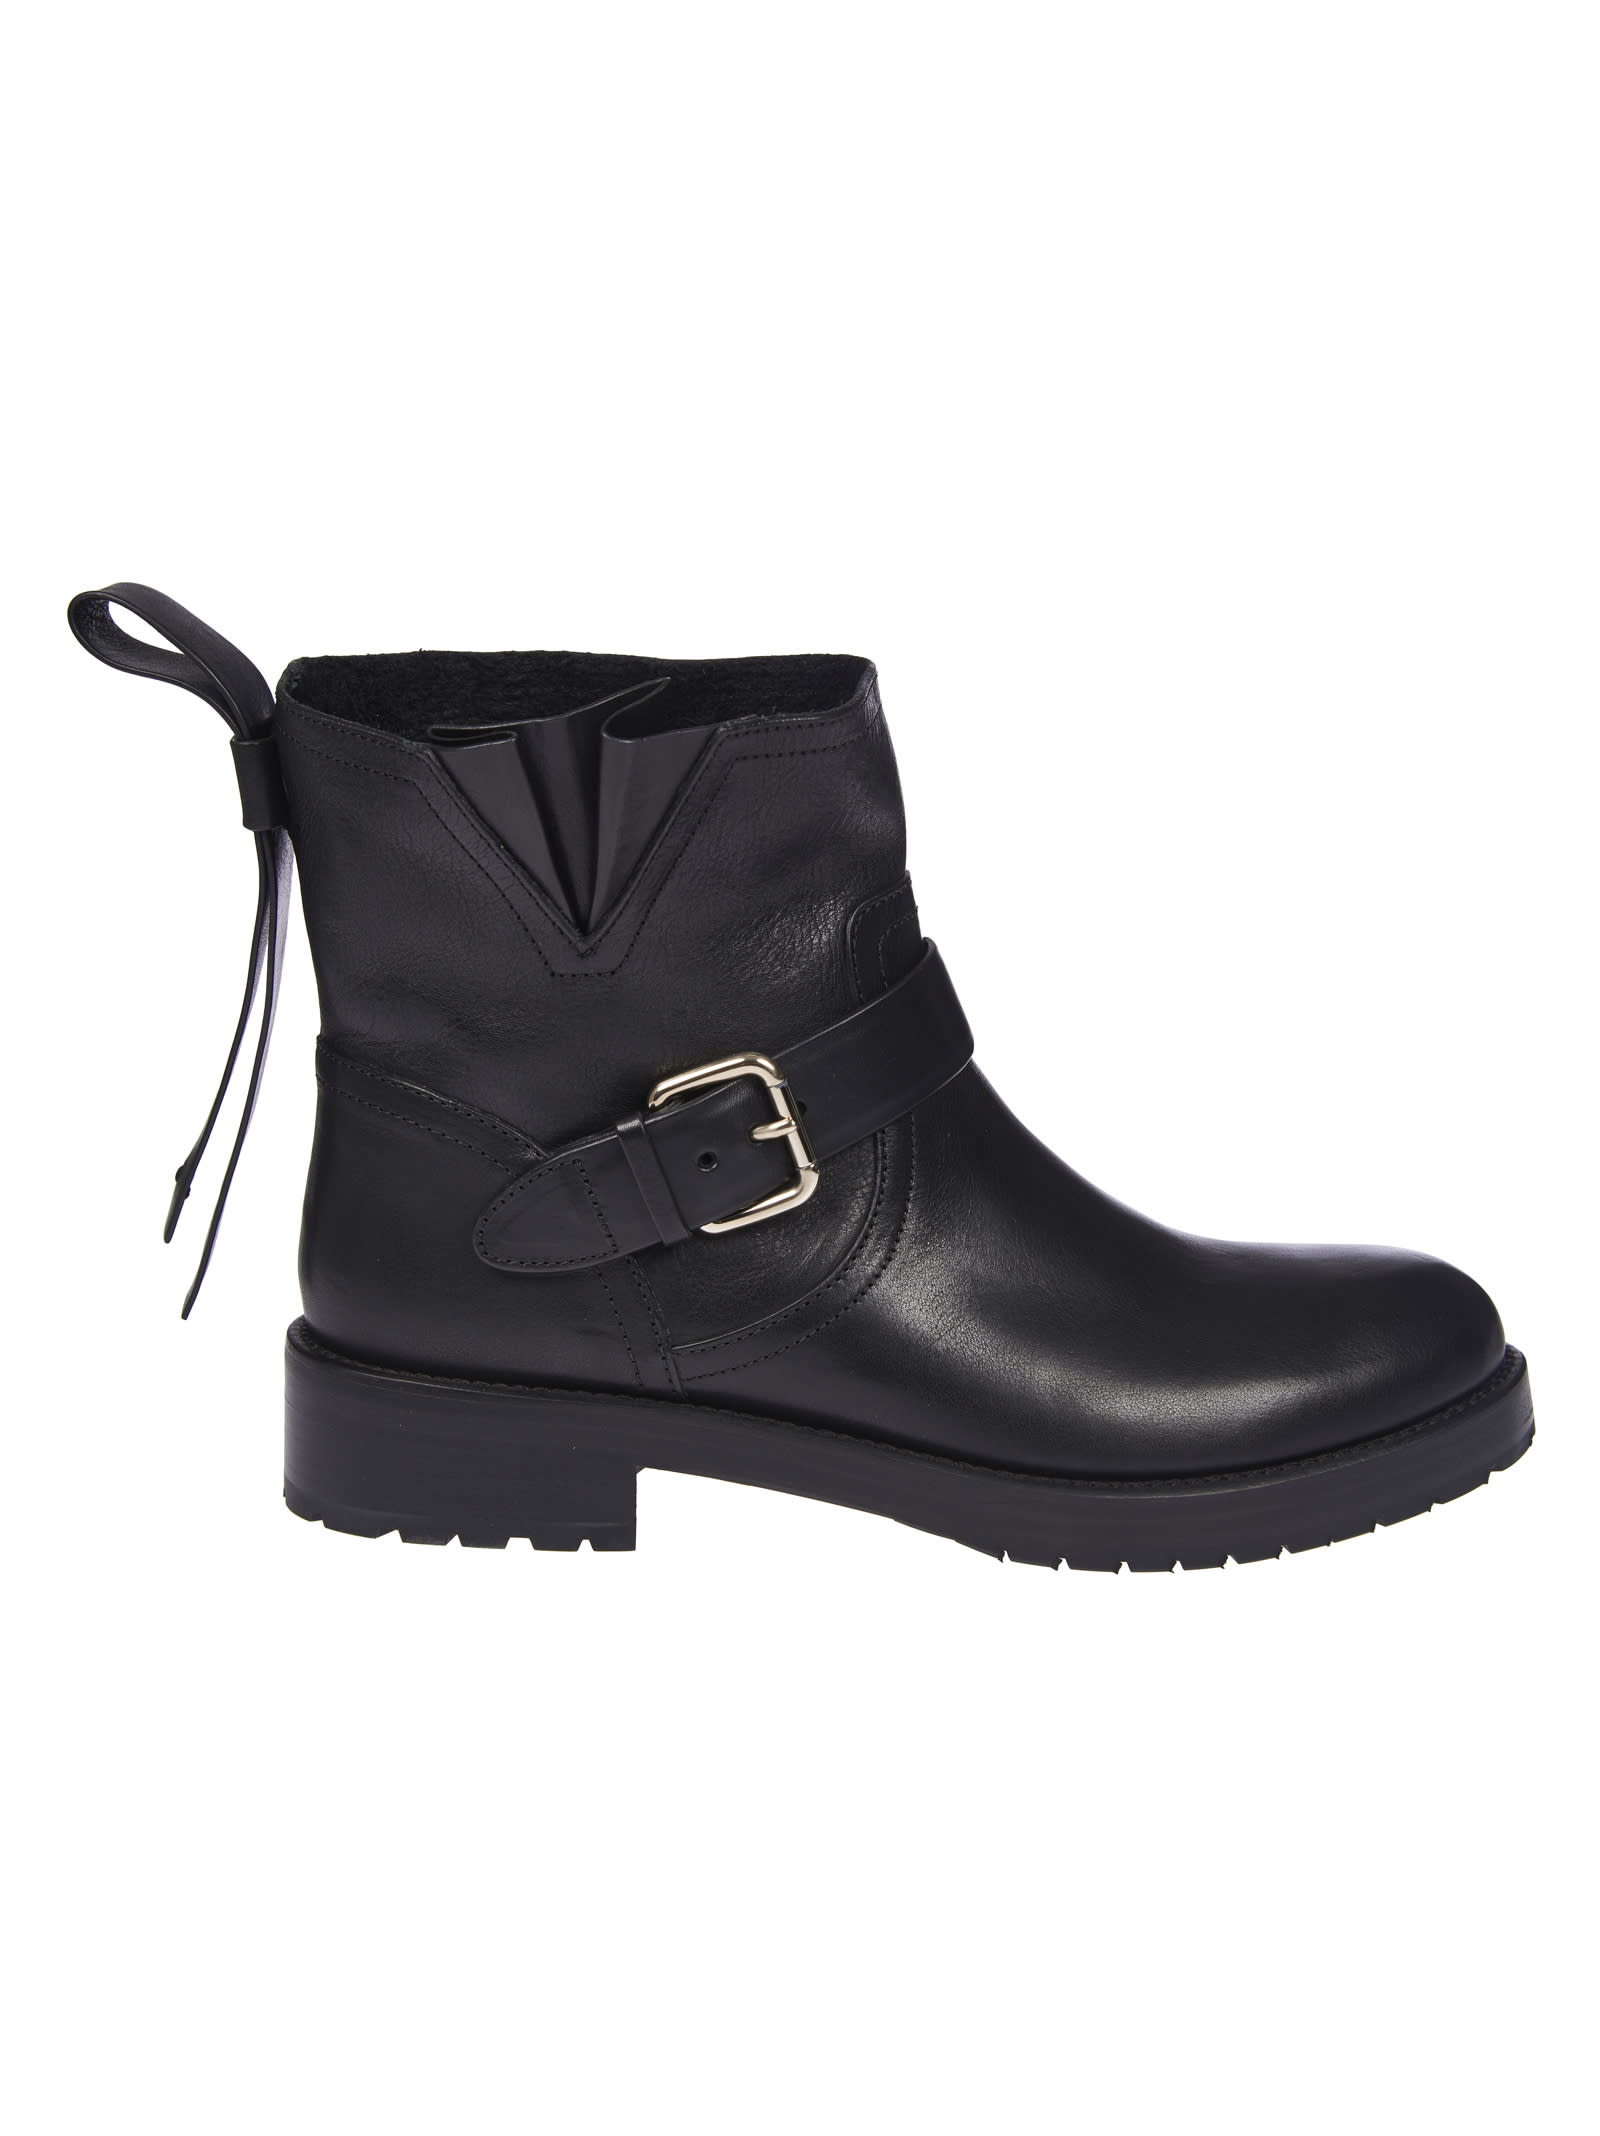 Buy RED Valentino Side Buckled Boots online, shop RED Valentino shoes with free shipping